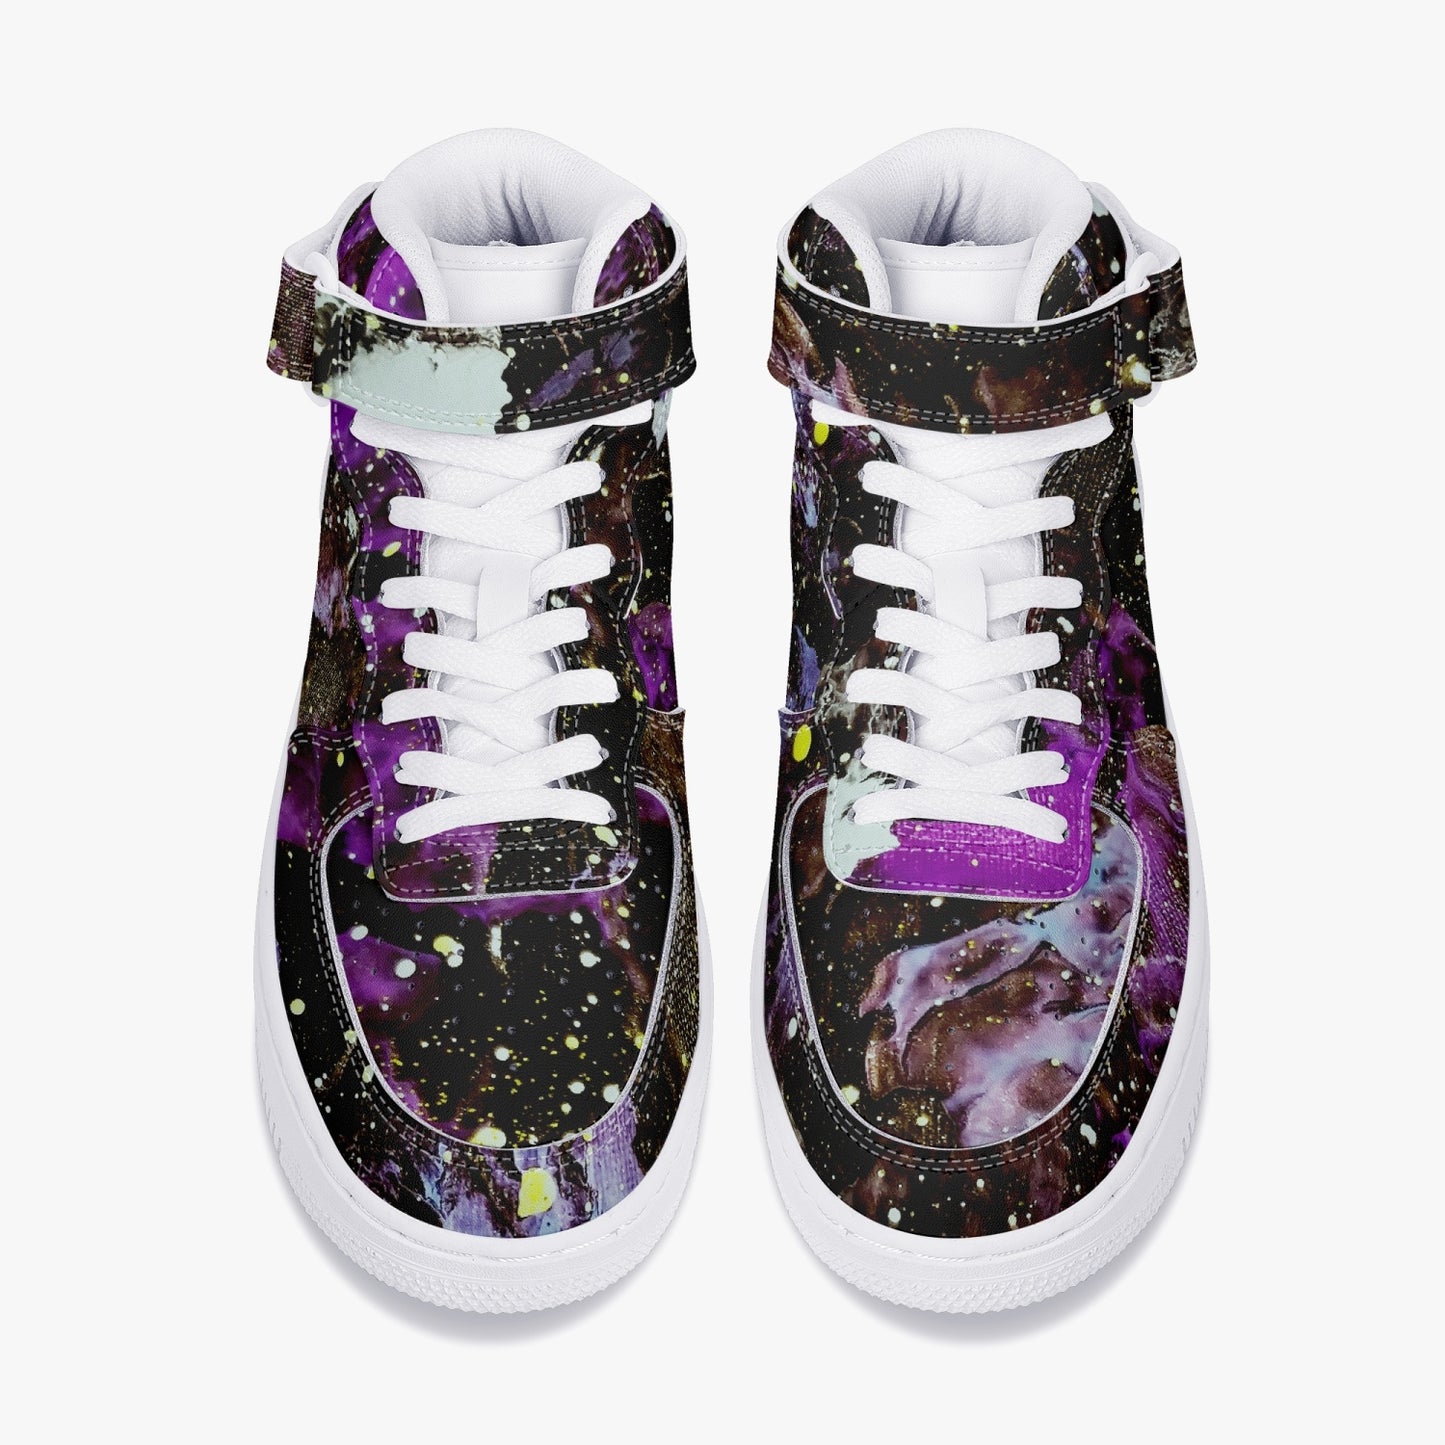 Galactic Storm AF1 High-Top Leather Sports Sneakers